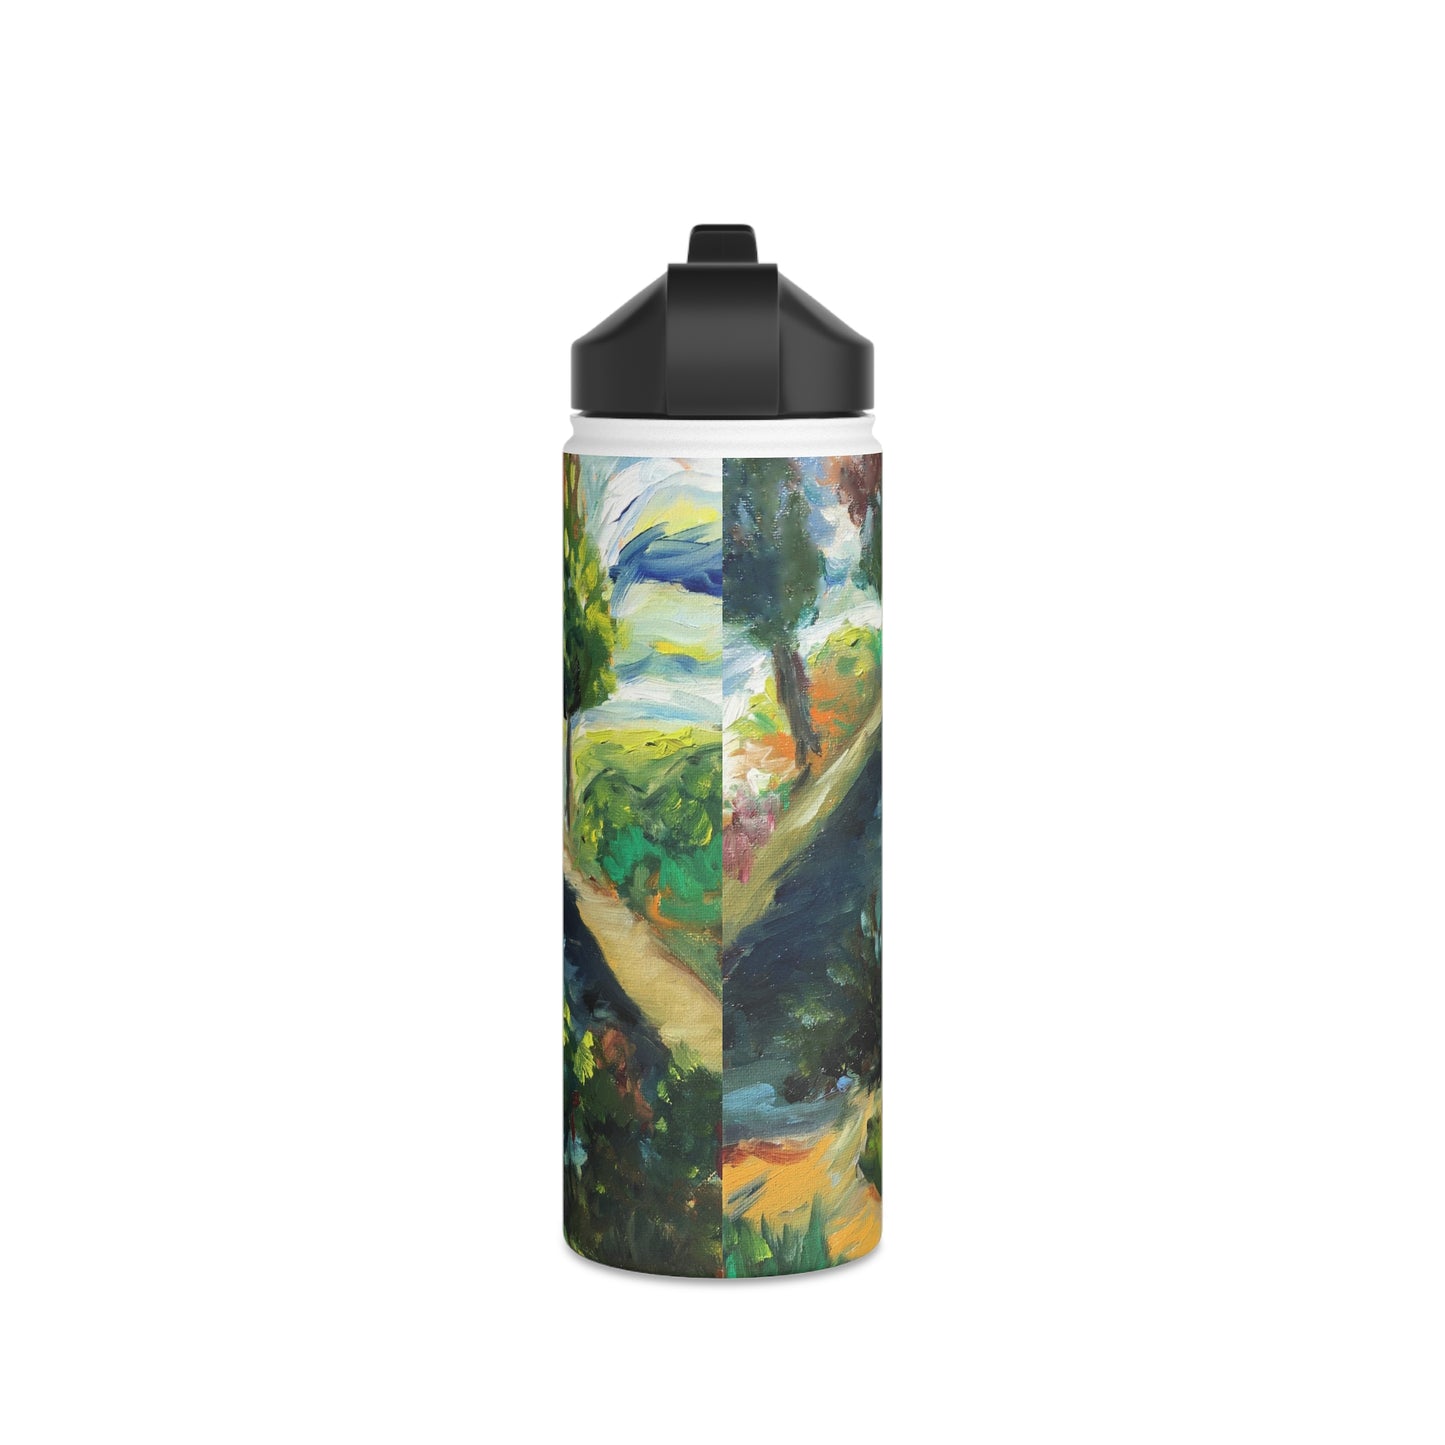 Temecula Duck Pond Colorful Landscape Stainless Steel Water Bottle, Standard Lid